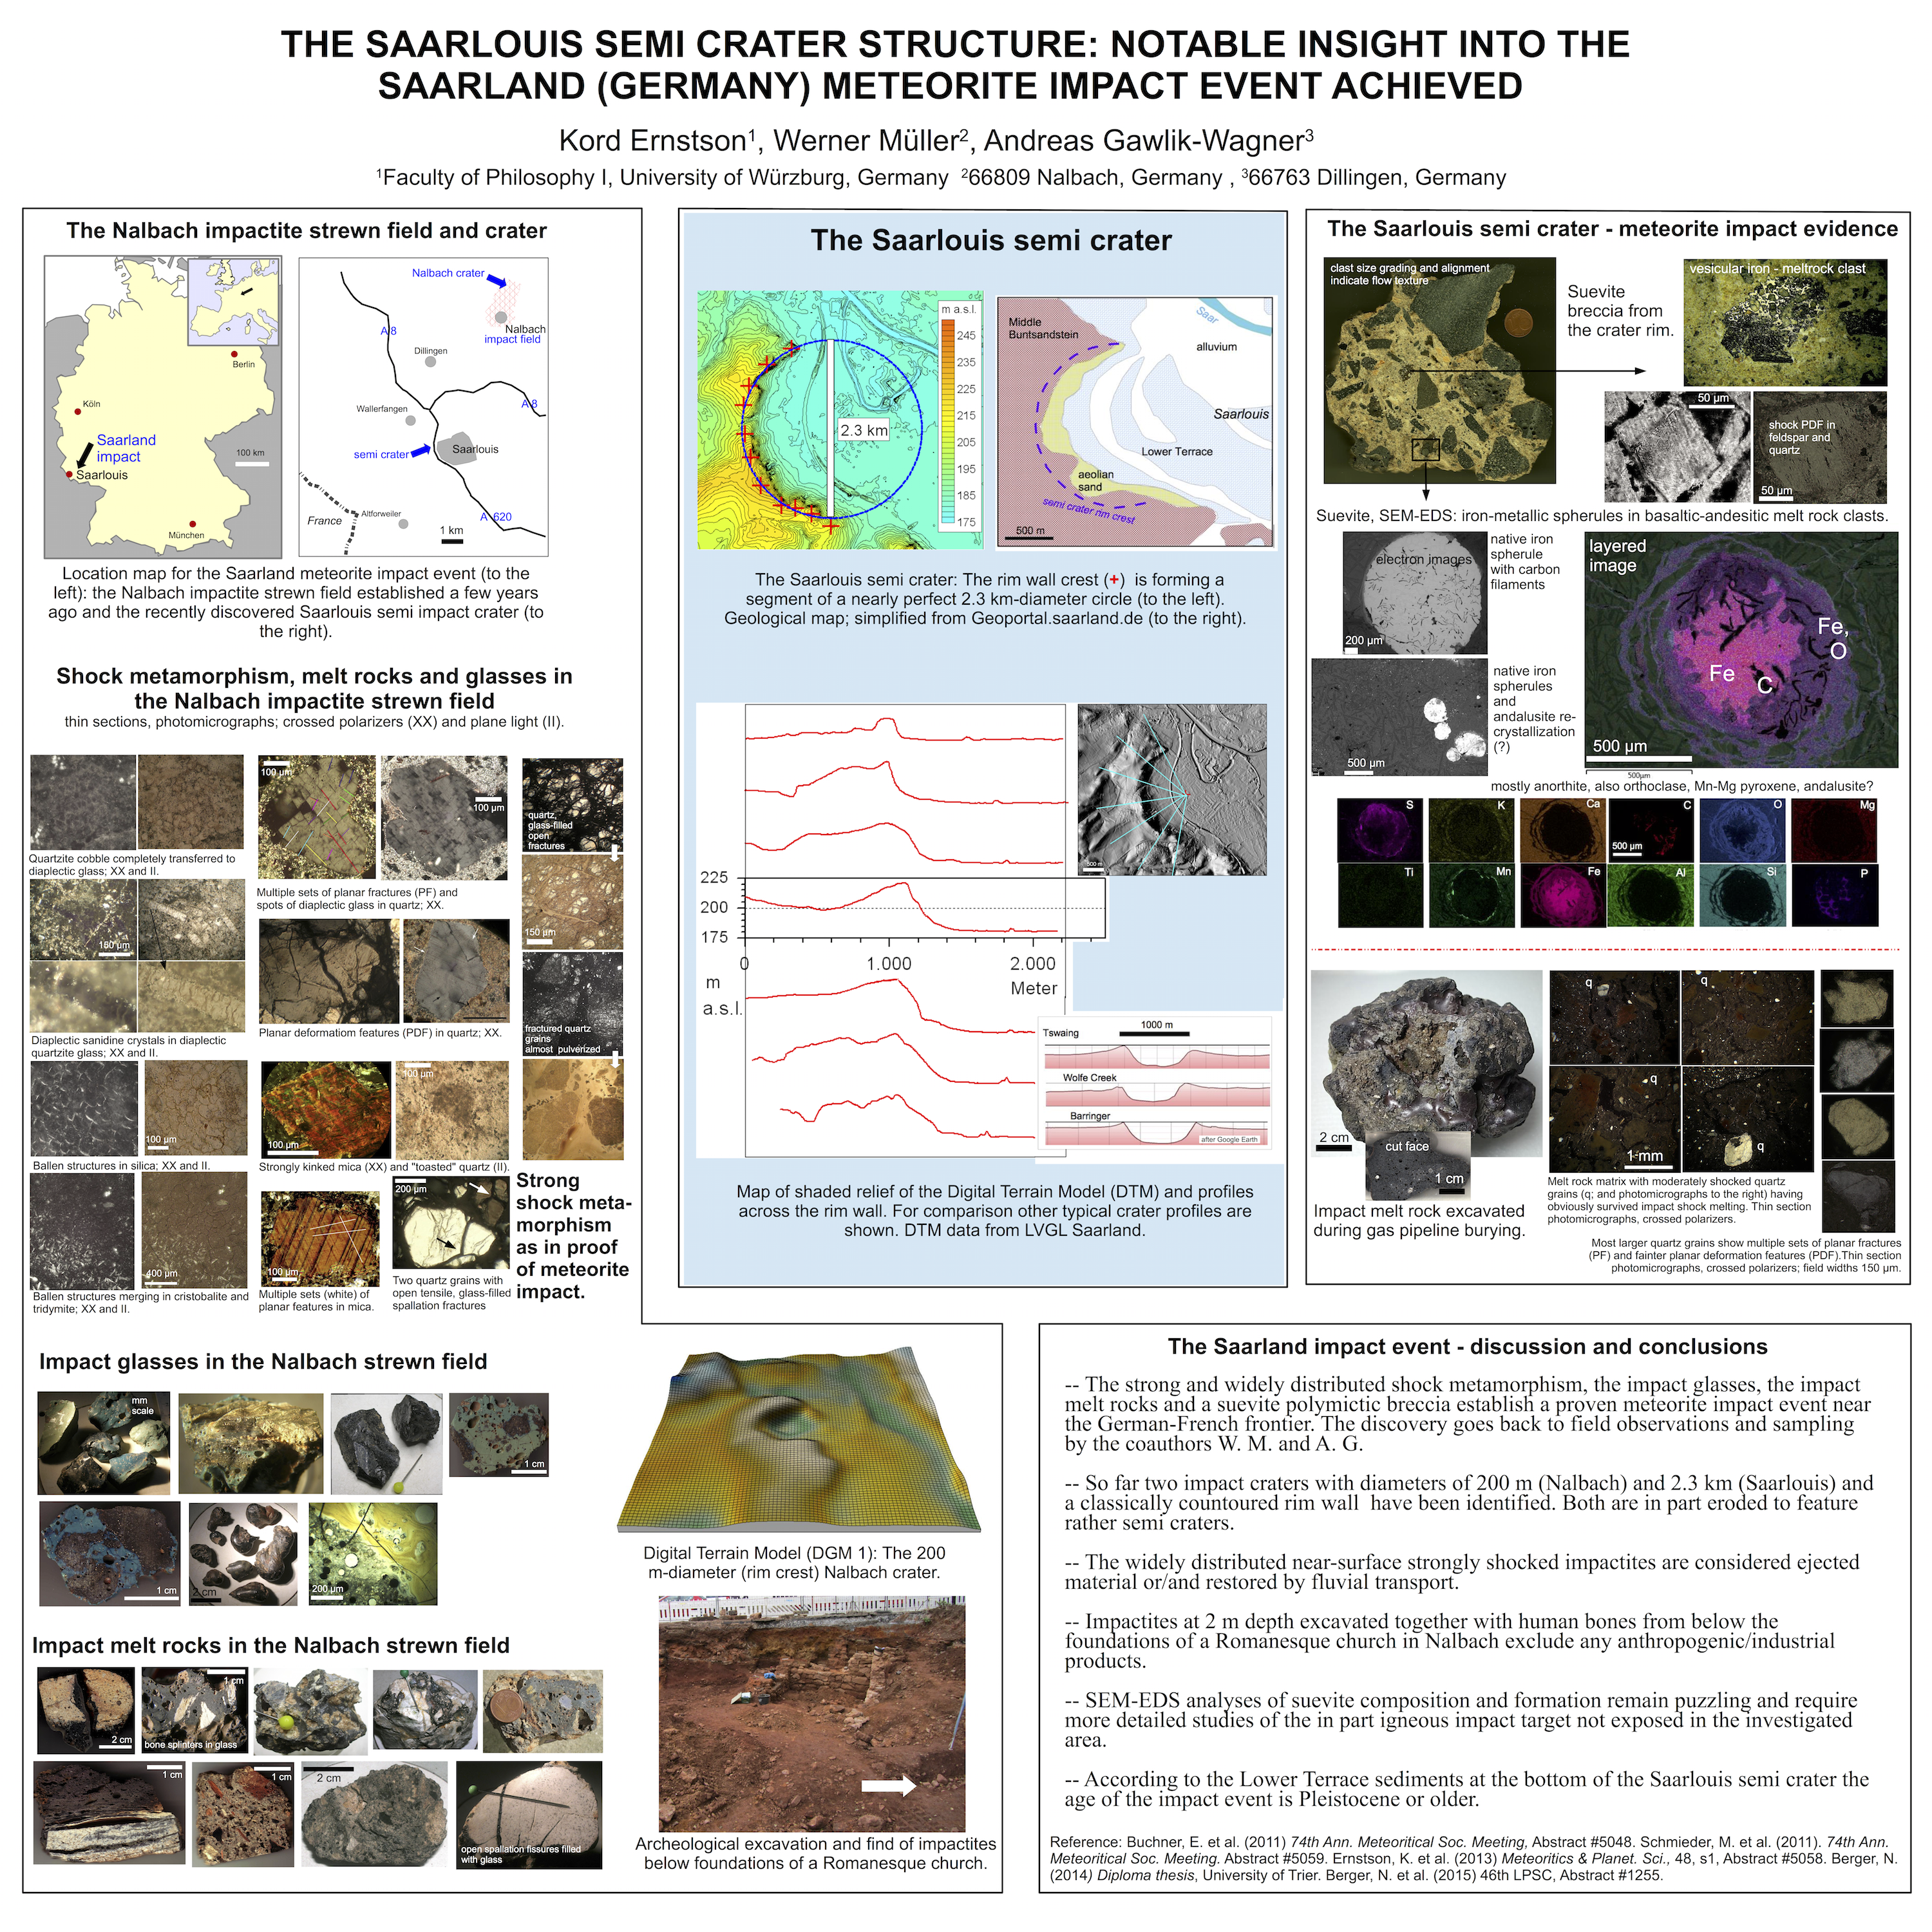 Saarland Nalbach Impakt Saarlouis-Krater Lunar & Planetary Science Conference Poster